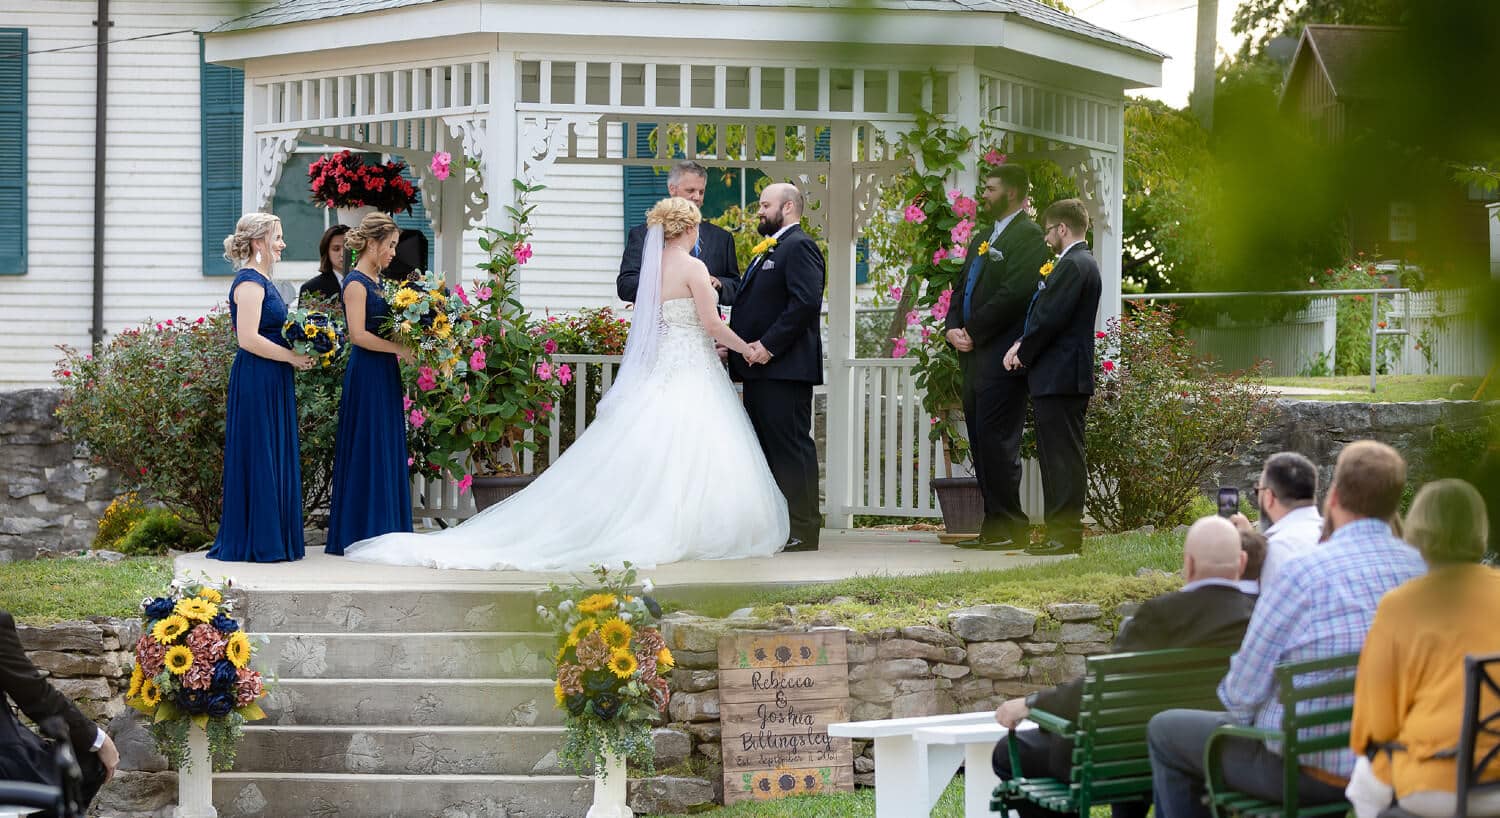 Bridal party standing by white gazebo with minister performing ceremony and guests observing from seating in yard, hanging pink potted flowers.